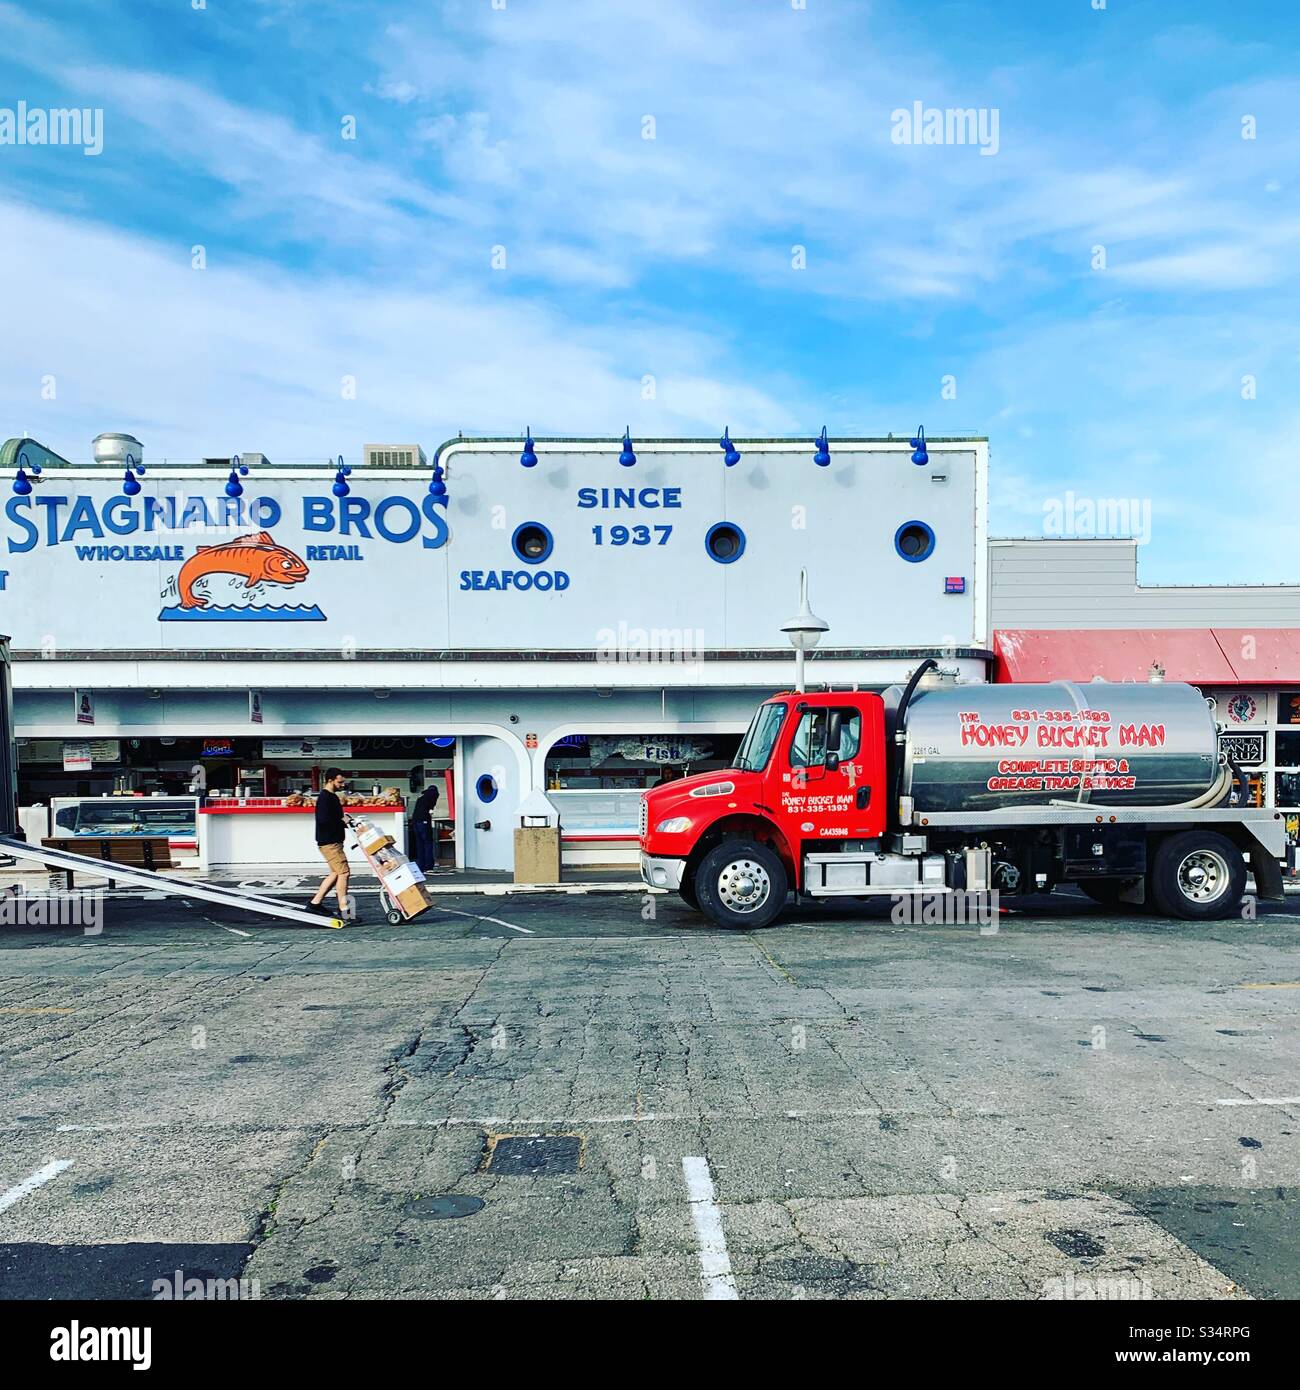 Morning delivery in front of Stagnaro Brothers wholesale and retail seafood, Santa Cruz Wharf, Santa Cruz, California, United States Stock Photo